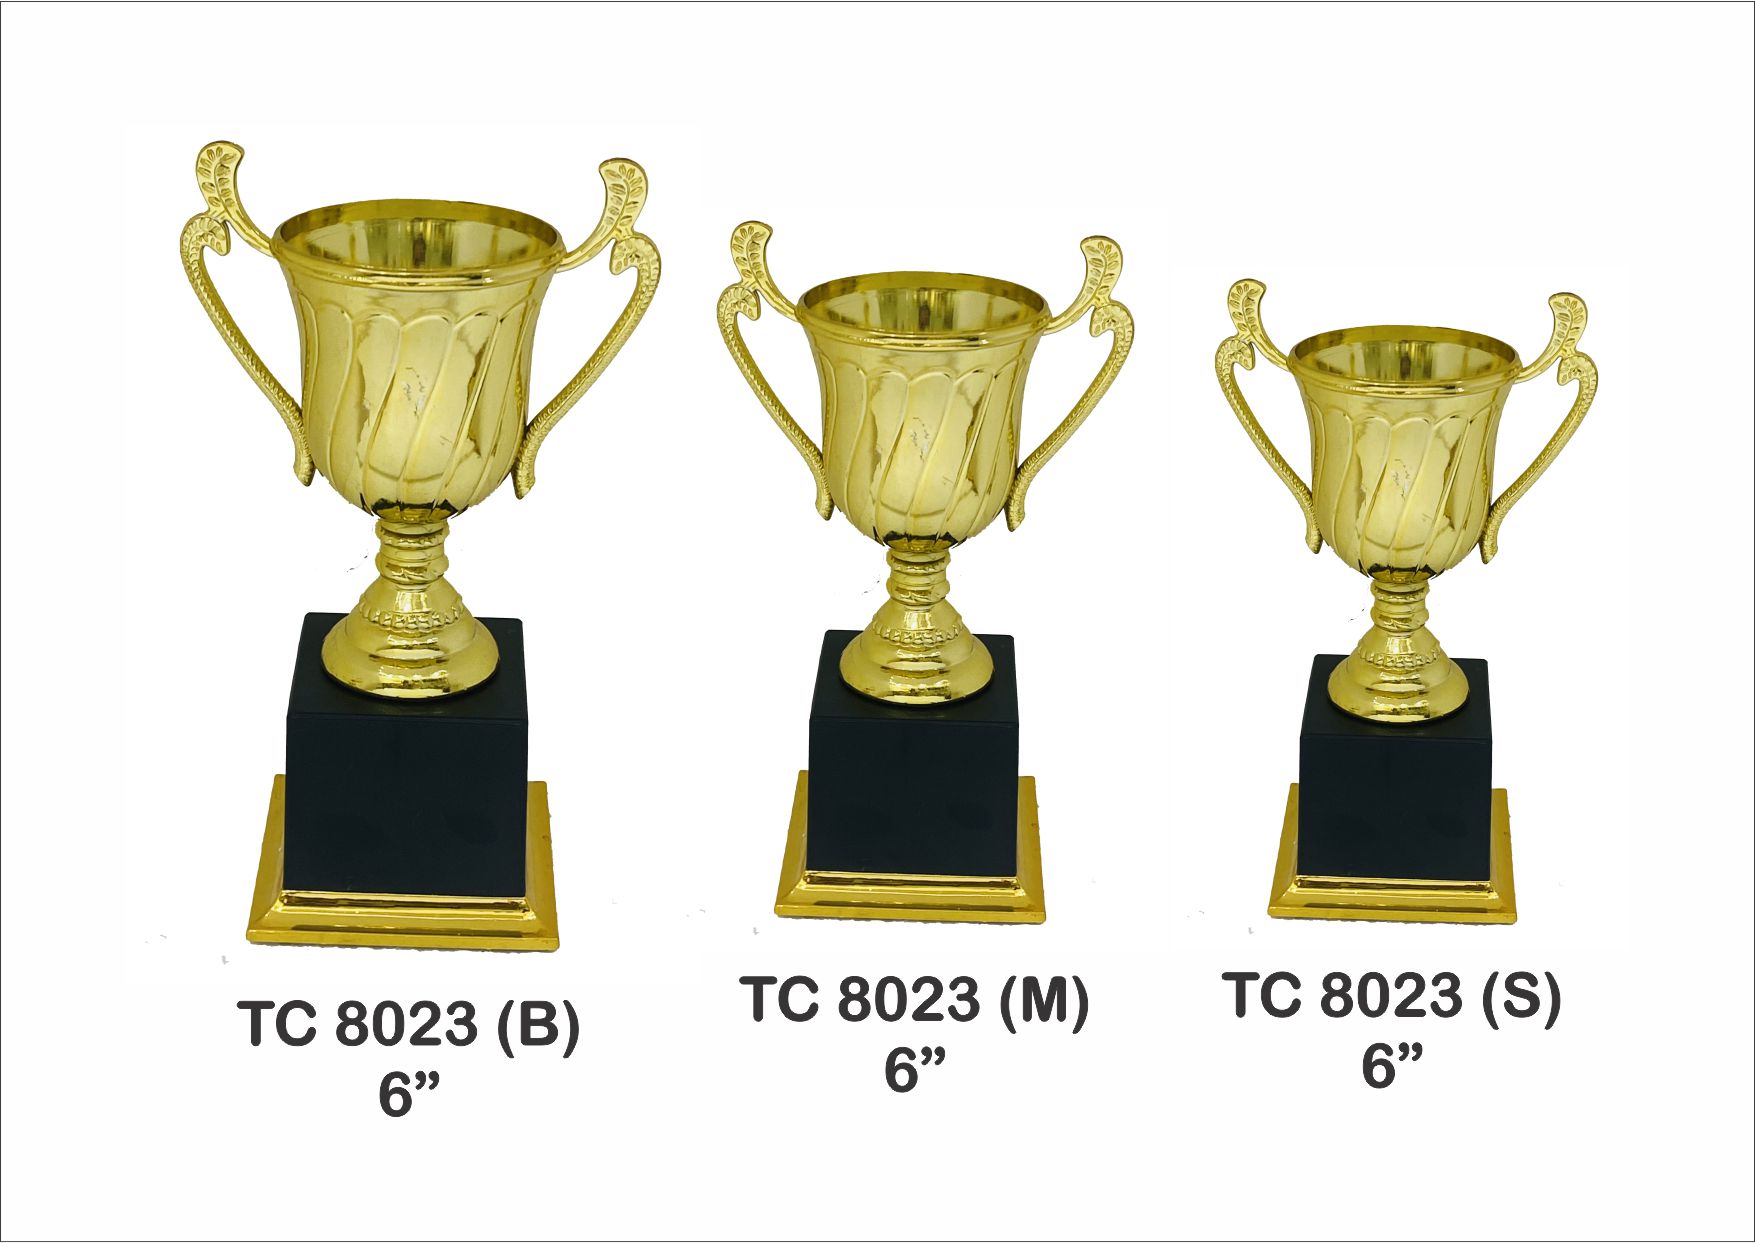 Cup Trophy Manufacturer,Supplier,Distributor & Exporter of sports cups ...